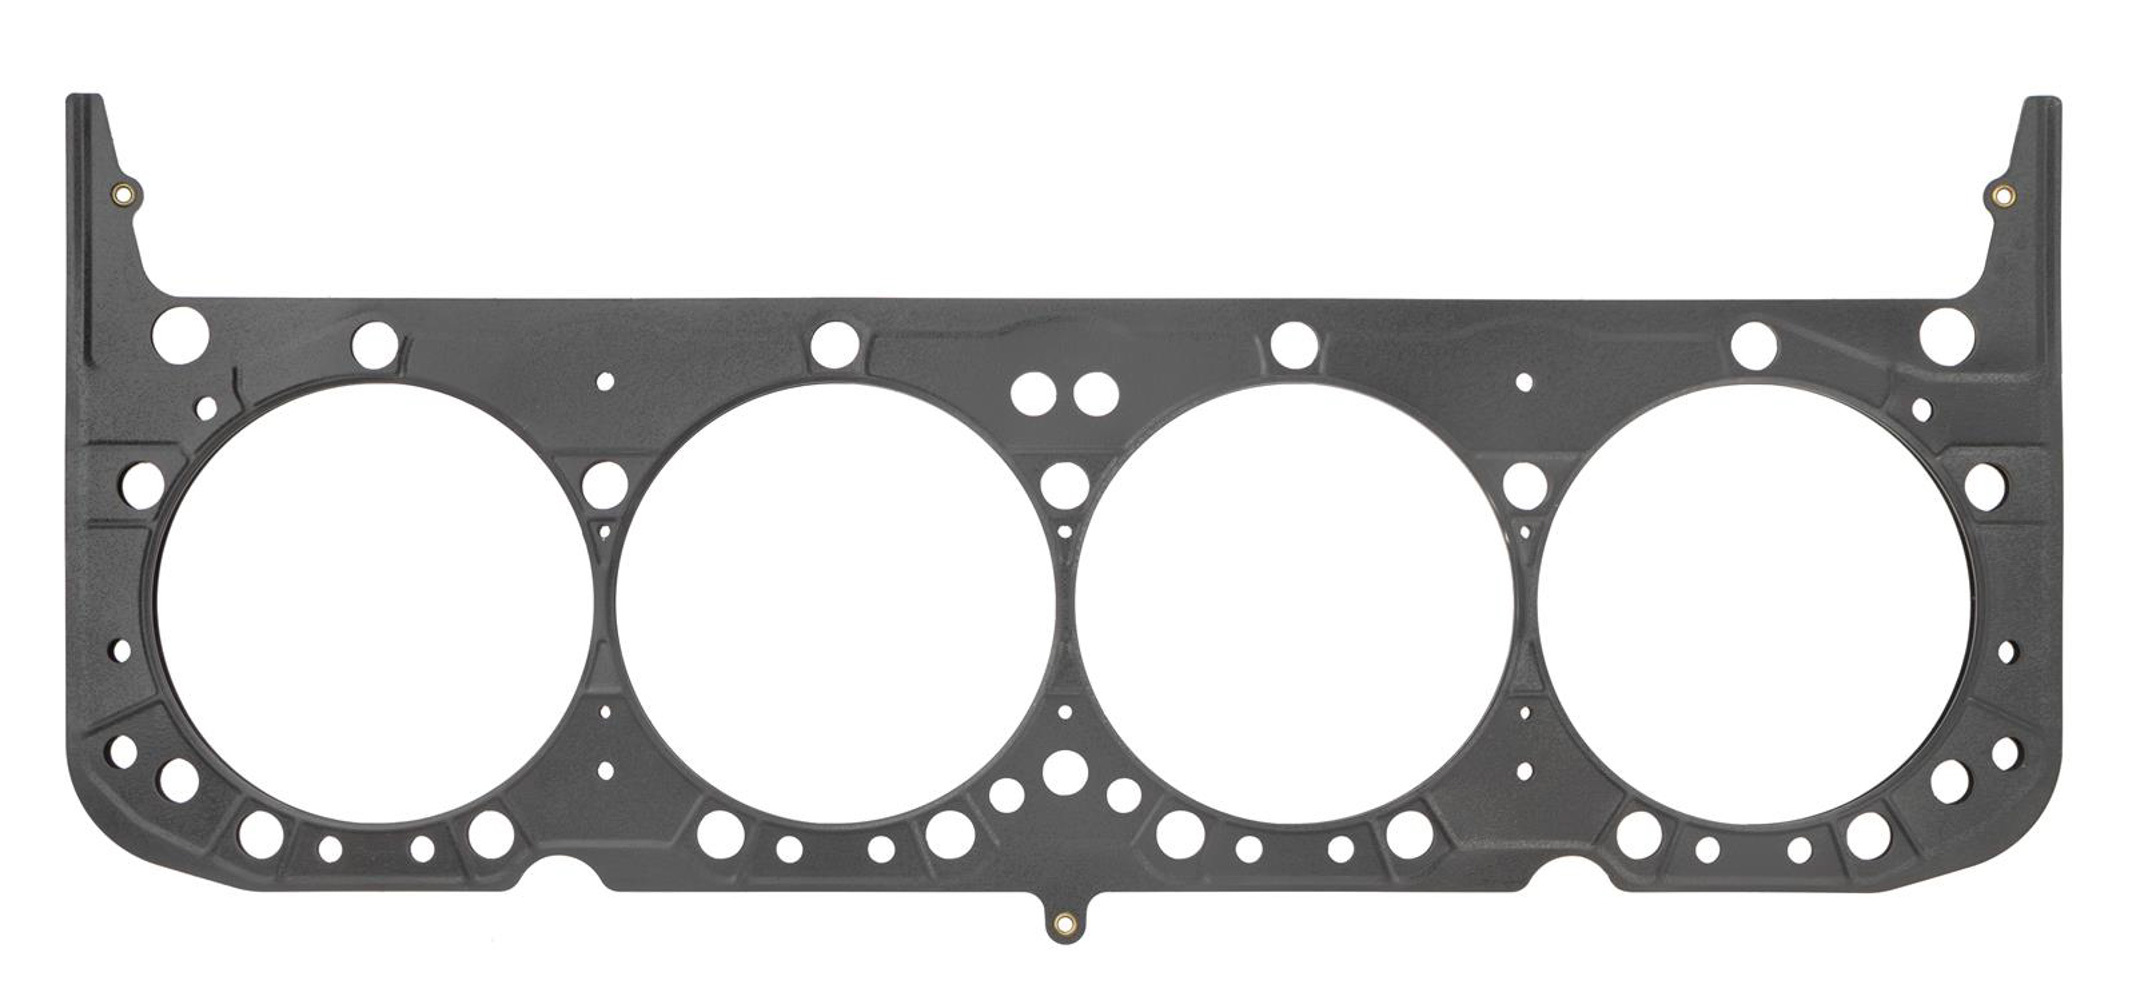 SCE Gaskets M110639 - Cylinder Head Gasket, MLS Spartan, 4.067 in Bore, 0.039 in Compression Thickness, Multi-Layer Steel, Small Block Chevy, Each